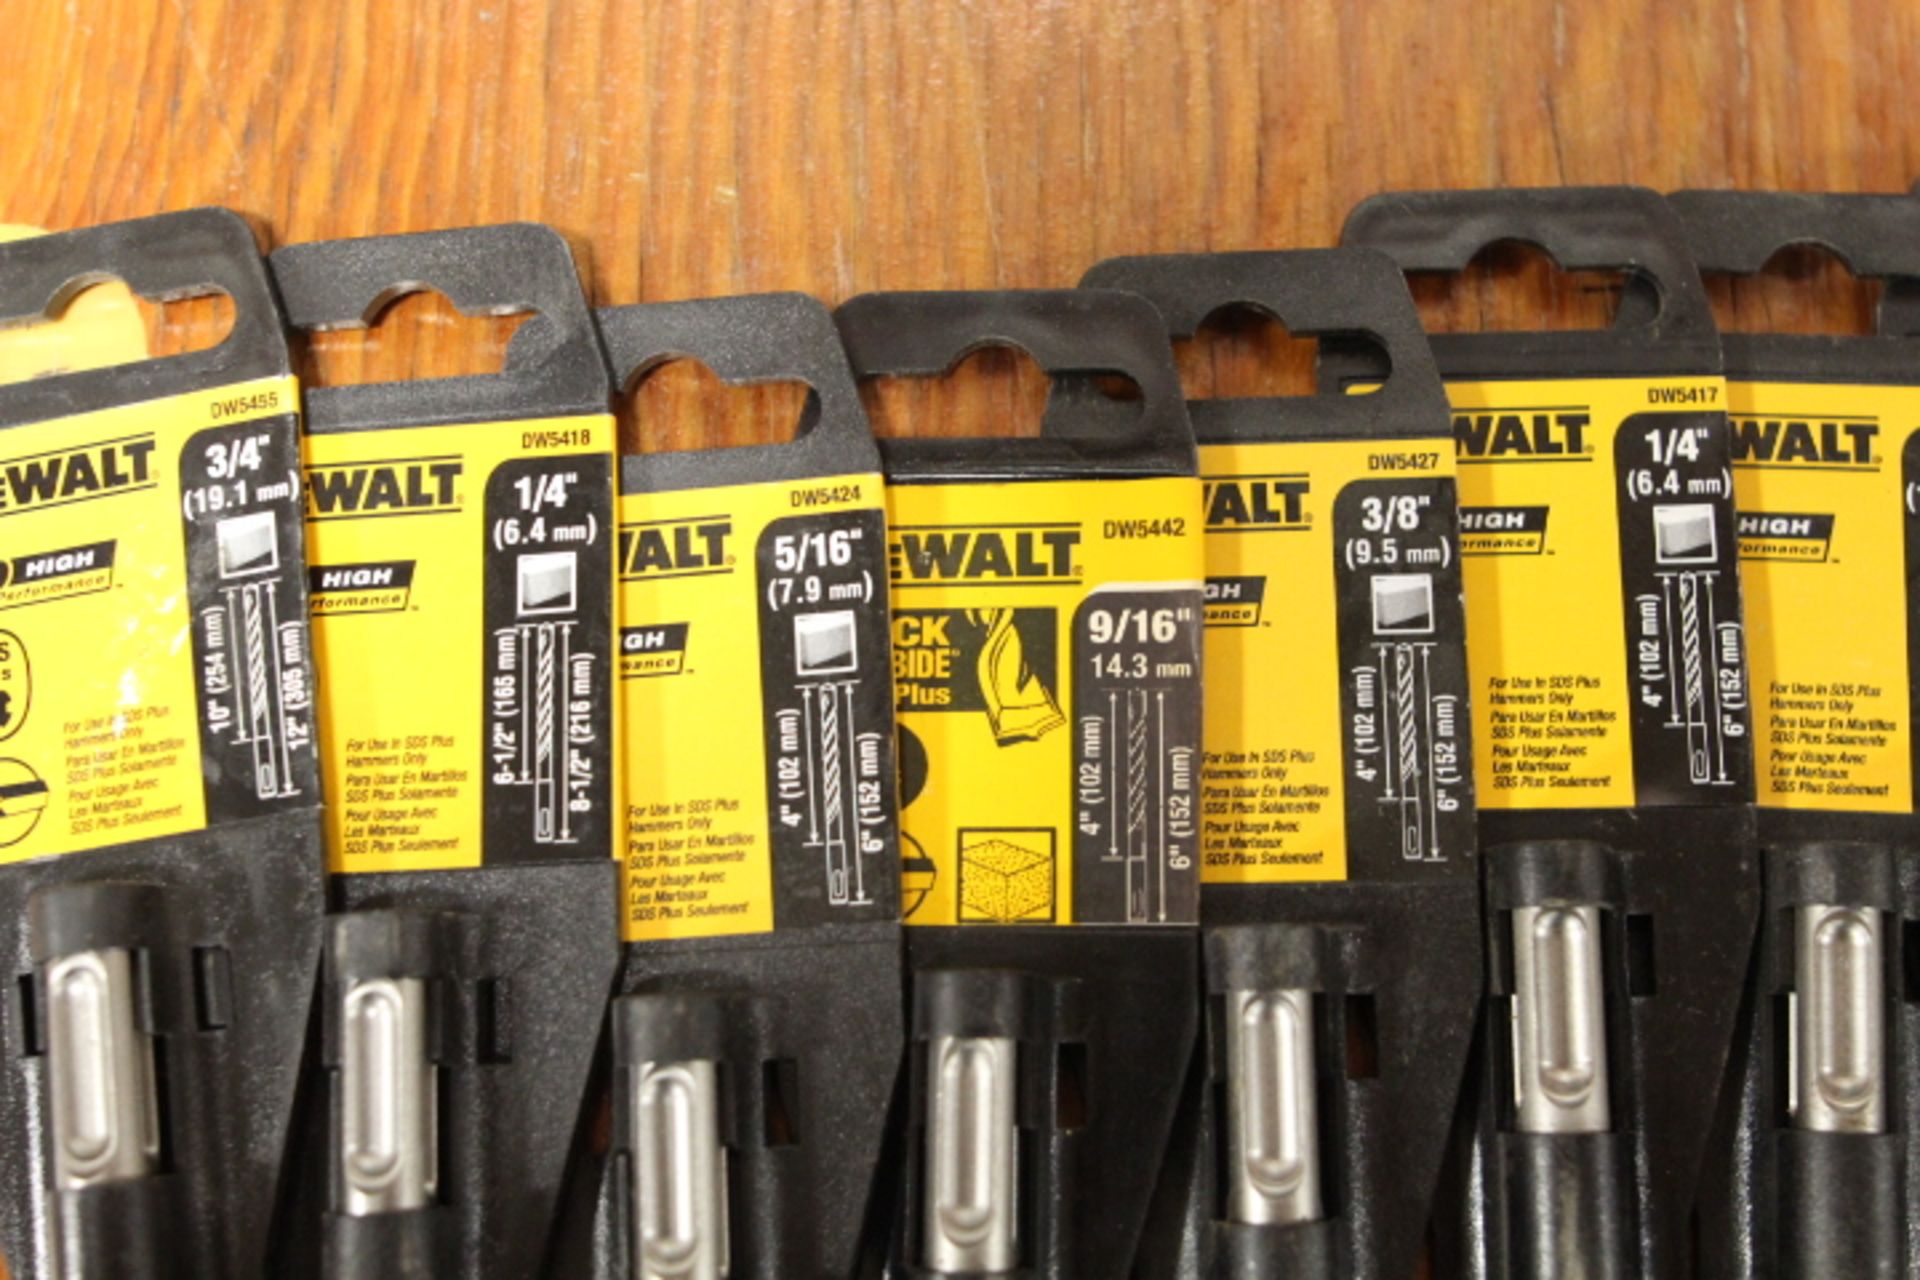 LOT OF 11 NEW DEWALT,SDS & MASONARY DRILL BITS VARIOUS SIZES AND LENGHTS - Image 2 of 3